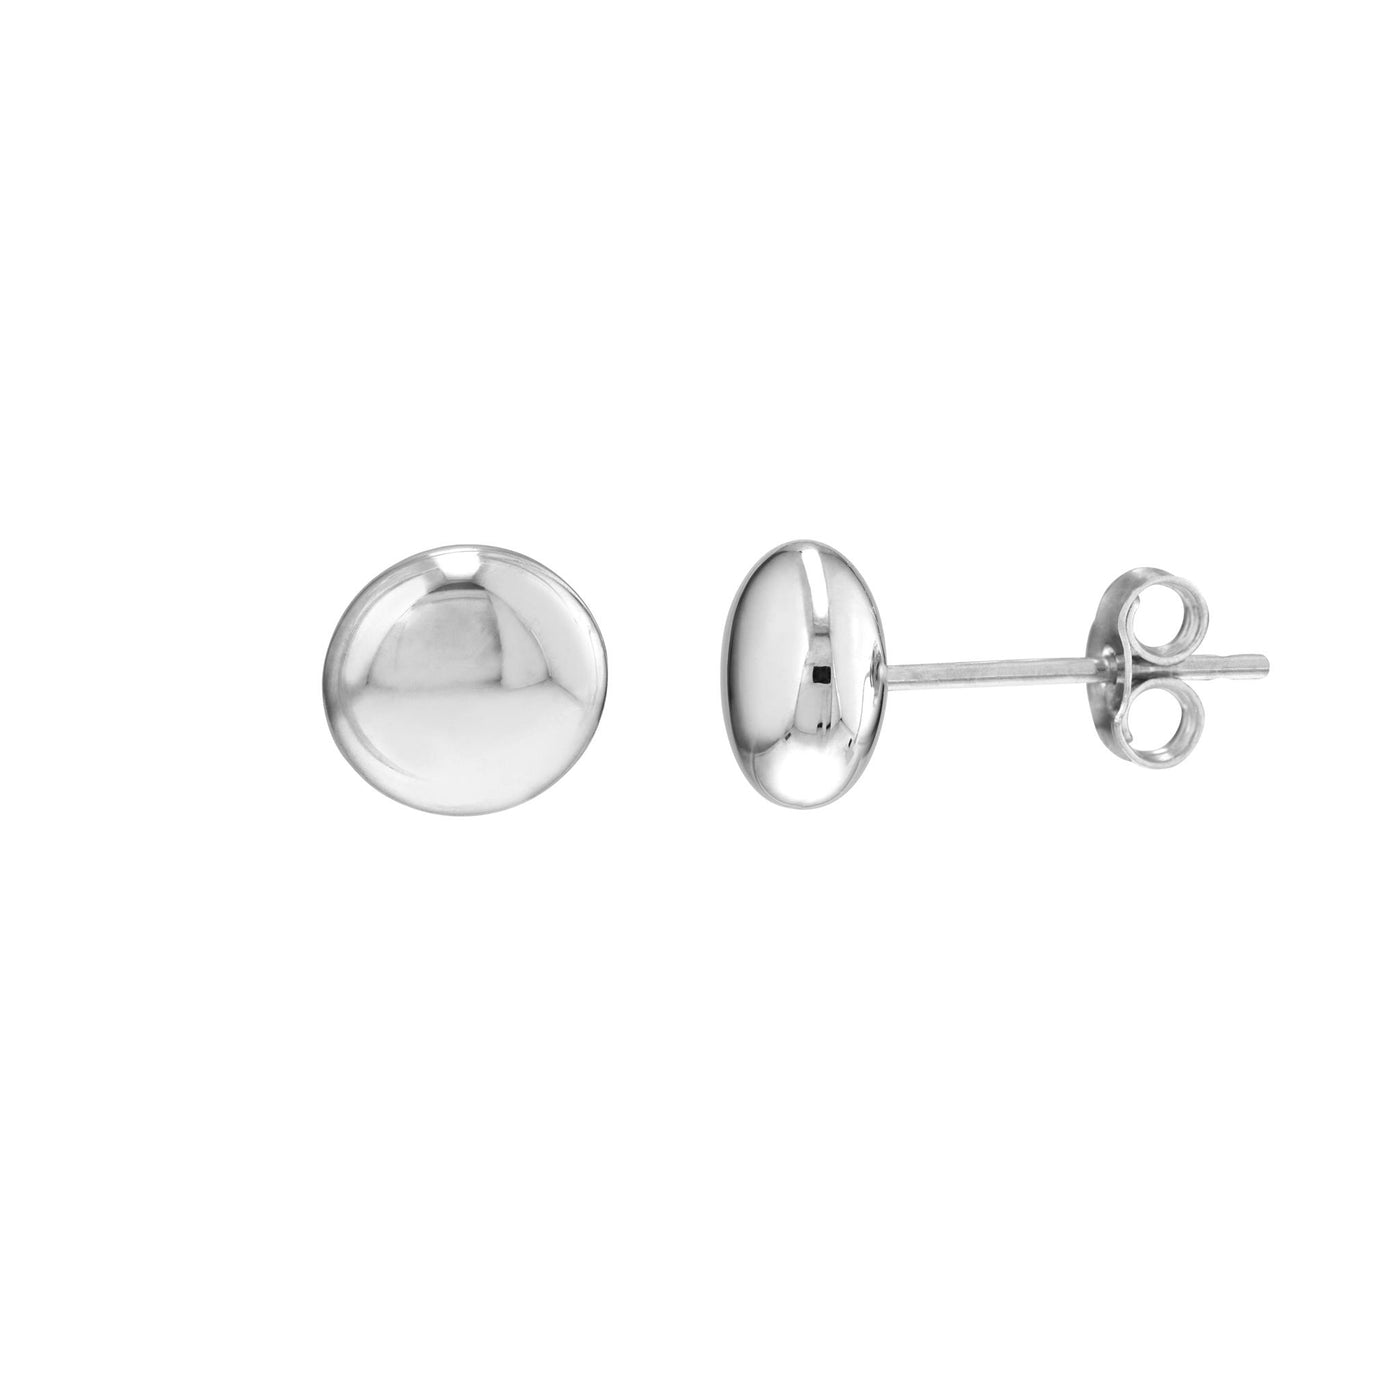 14K White Gold 7mm Circle Button Style Earrings